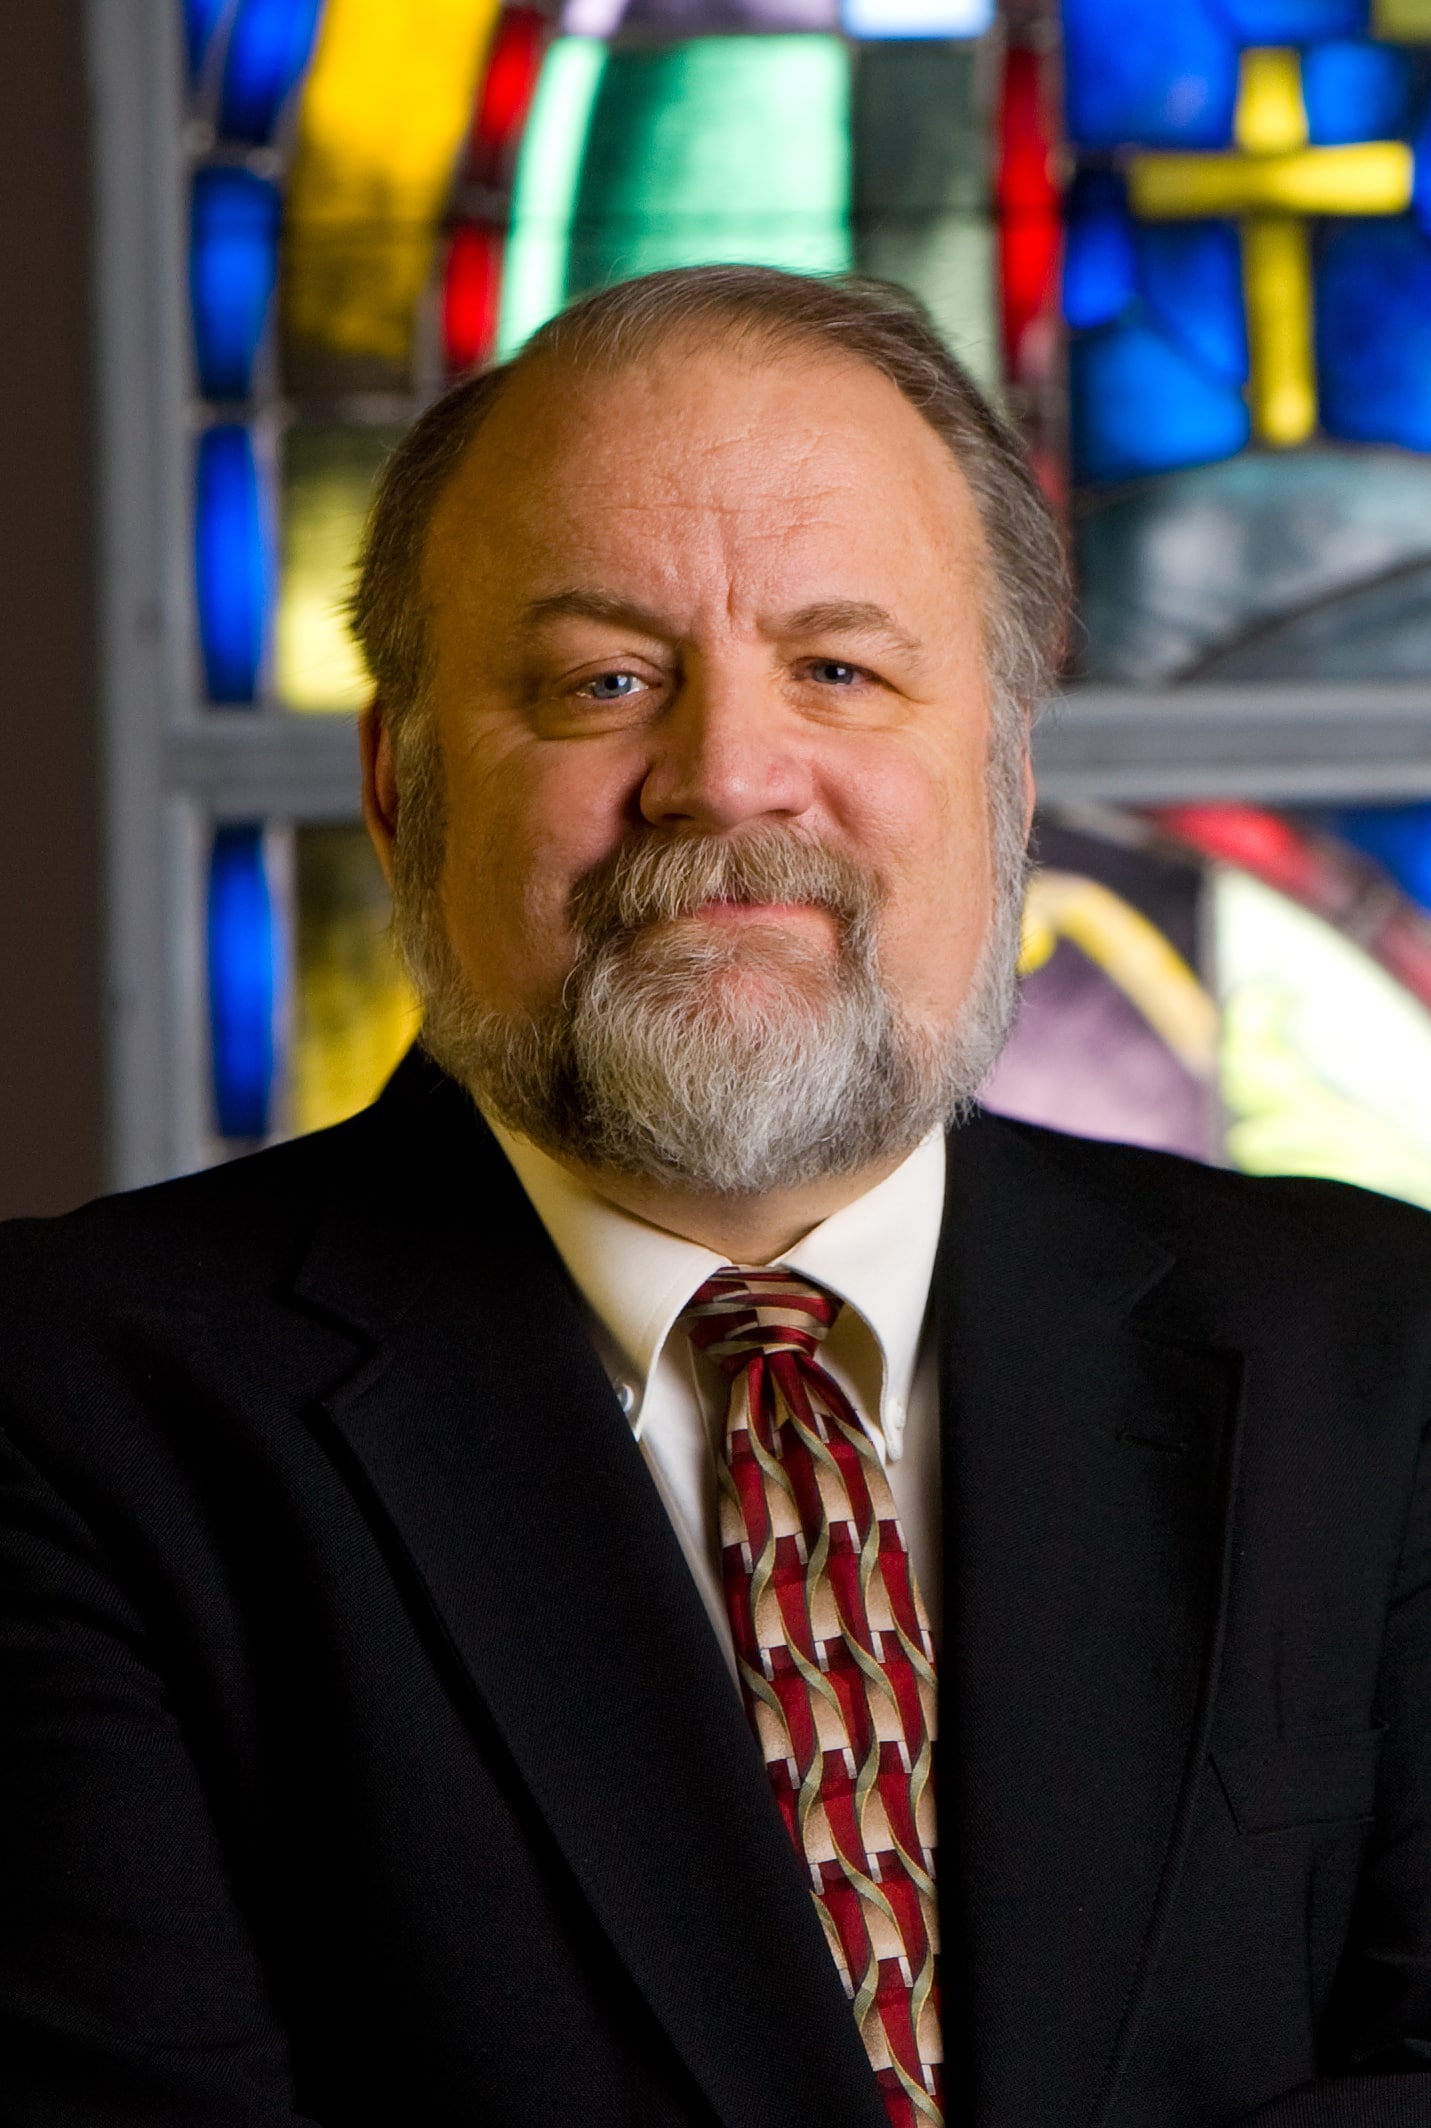 Dr. Gary Habermas, Distinguished Research Professor and Chair in the School of Religion's Department of Philosophy is photographed in Pate Chapel for the Liberty Journal on December 5, 2008. (Photo by Jerome Sturm)